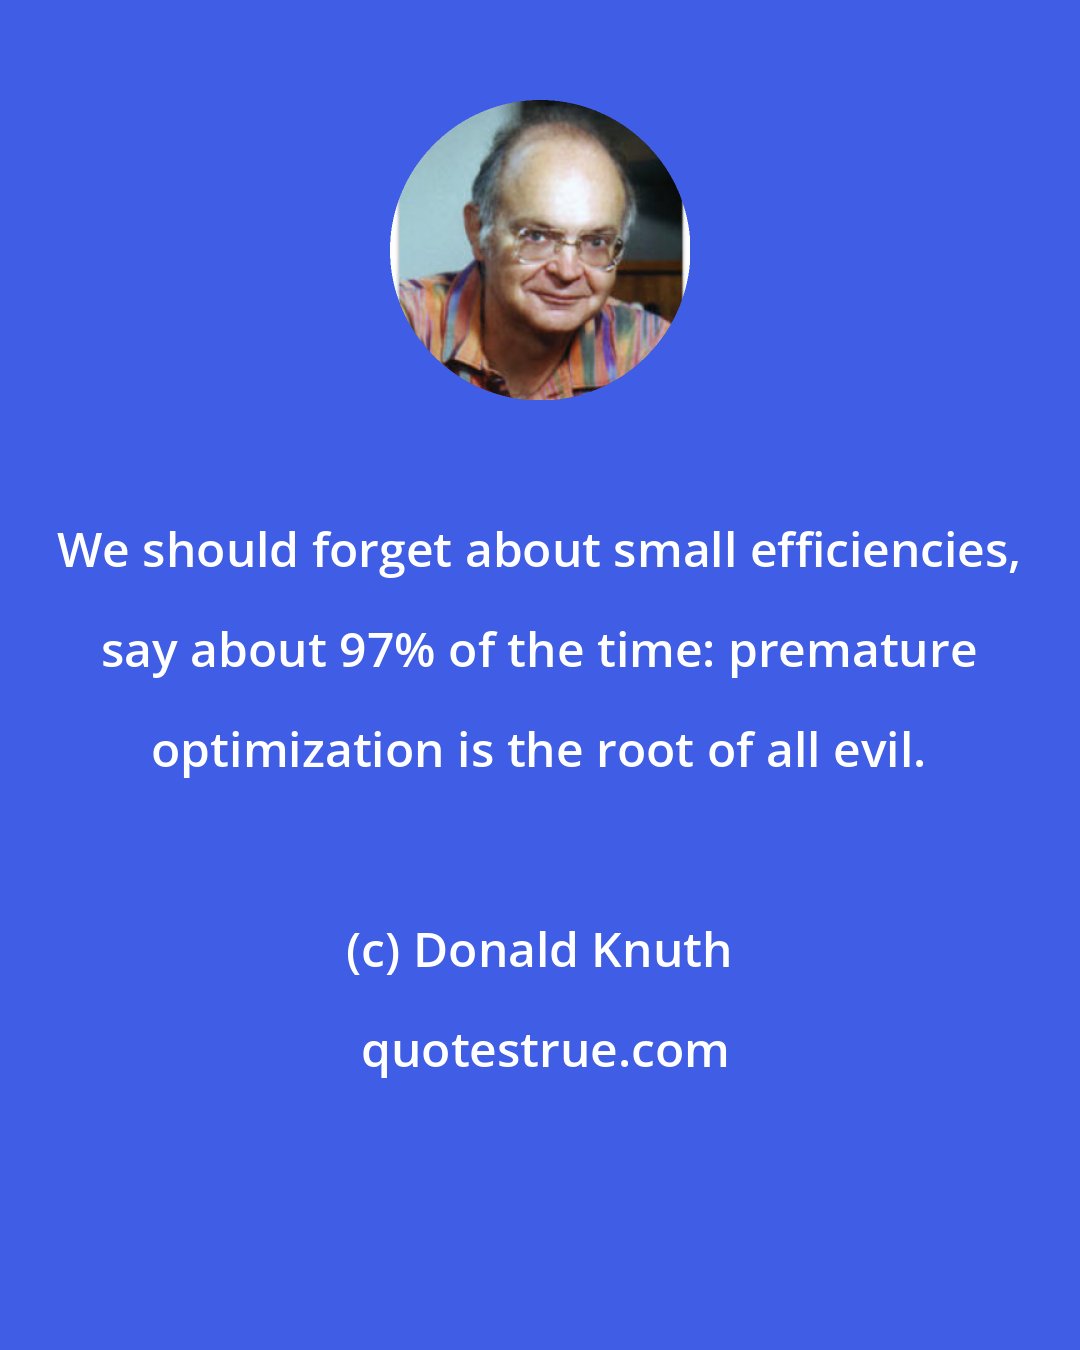 Donald Knuth: We should forget about small efficiencies, say about 97% of the time: premature optimization is the root of all evil.